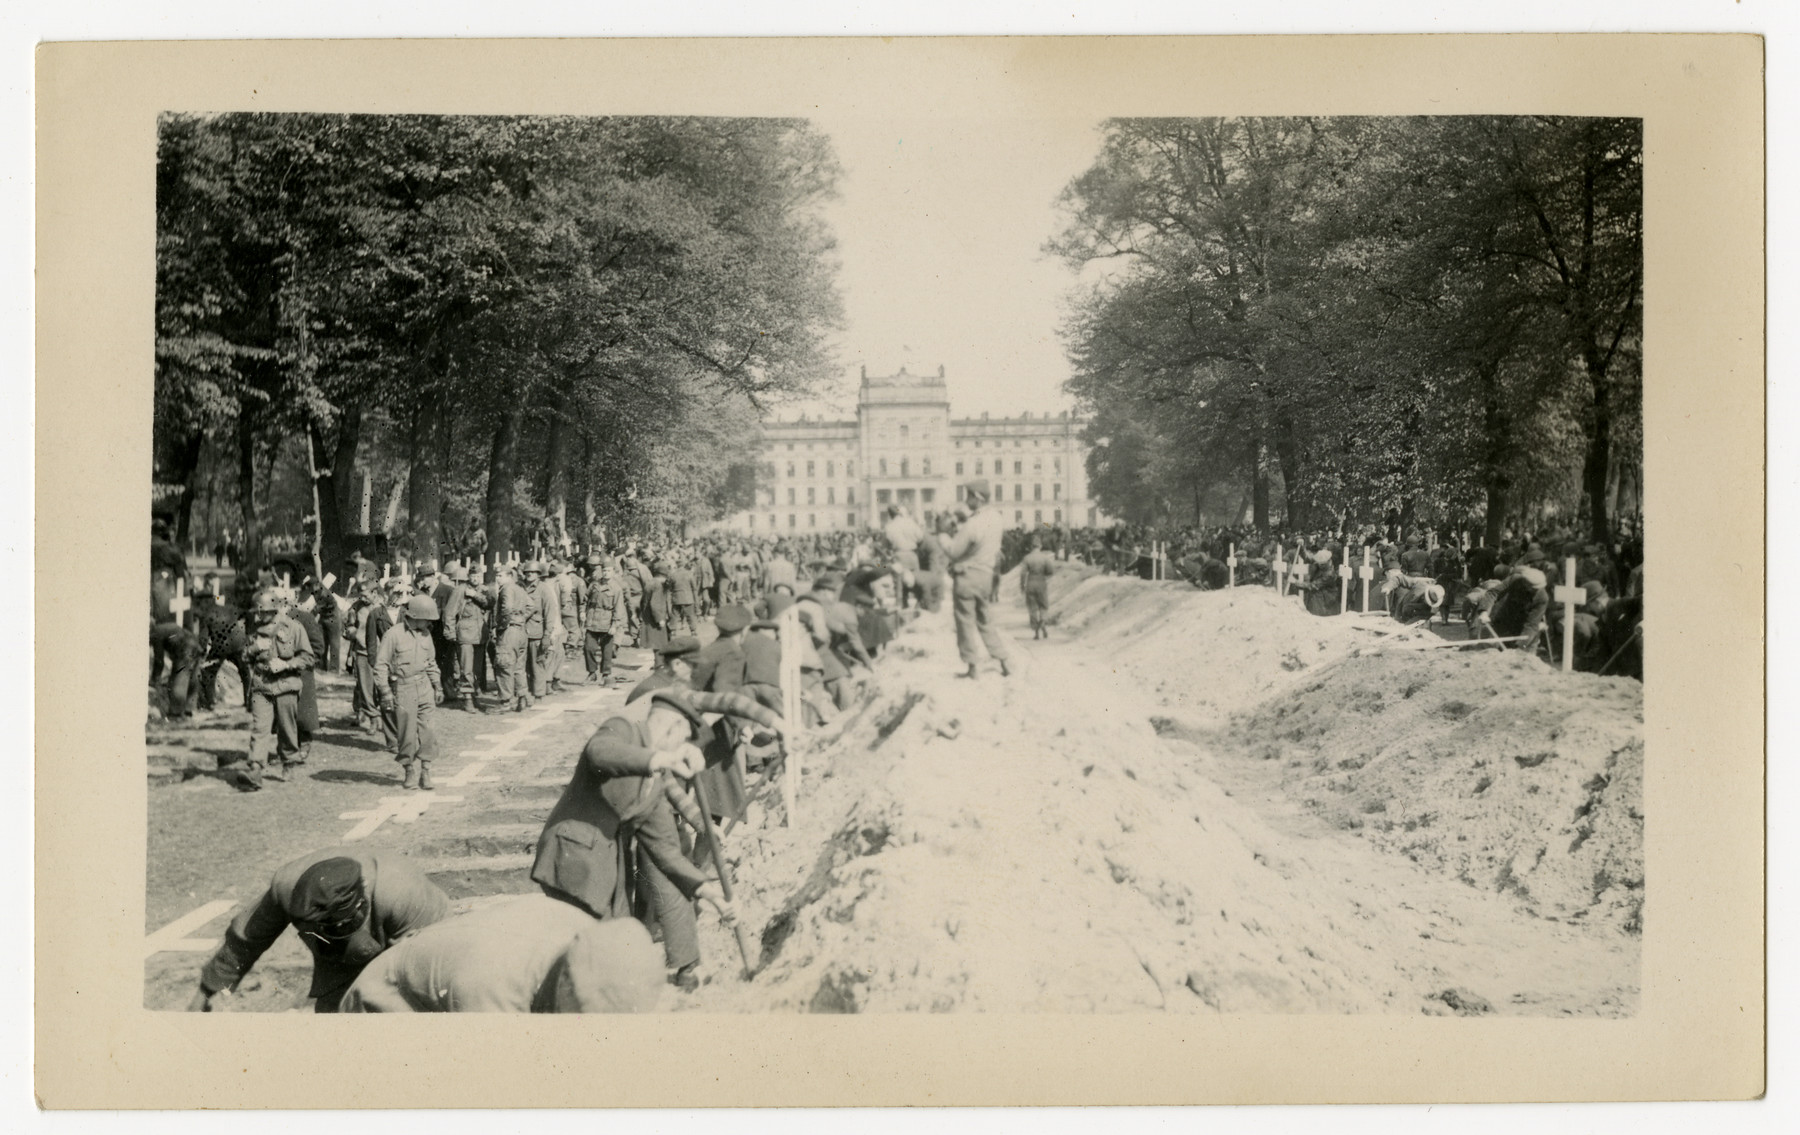 The population of Ludwigslust digs graves on the palace grounds of the Archduke of Mecklenburg, where they have been forced by U.S. troops to bury the bodies of prisoners killed in the Woebbelin concentration camp.